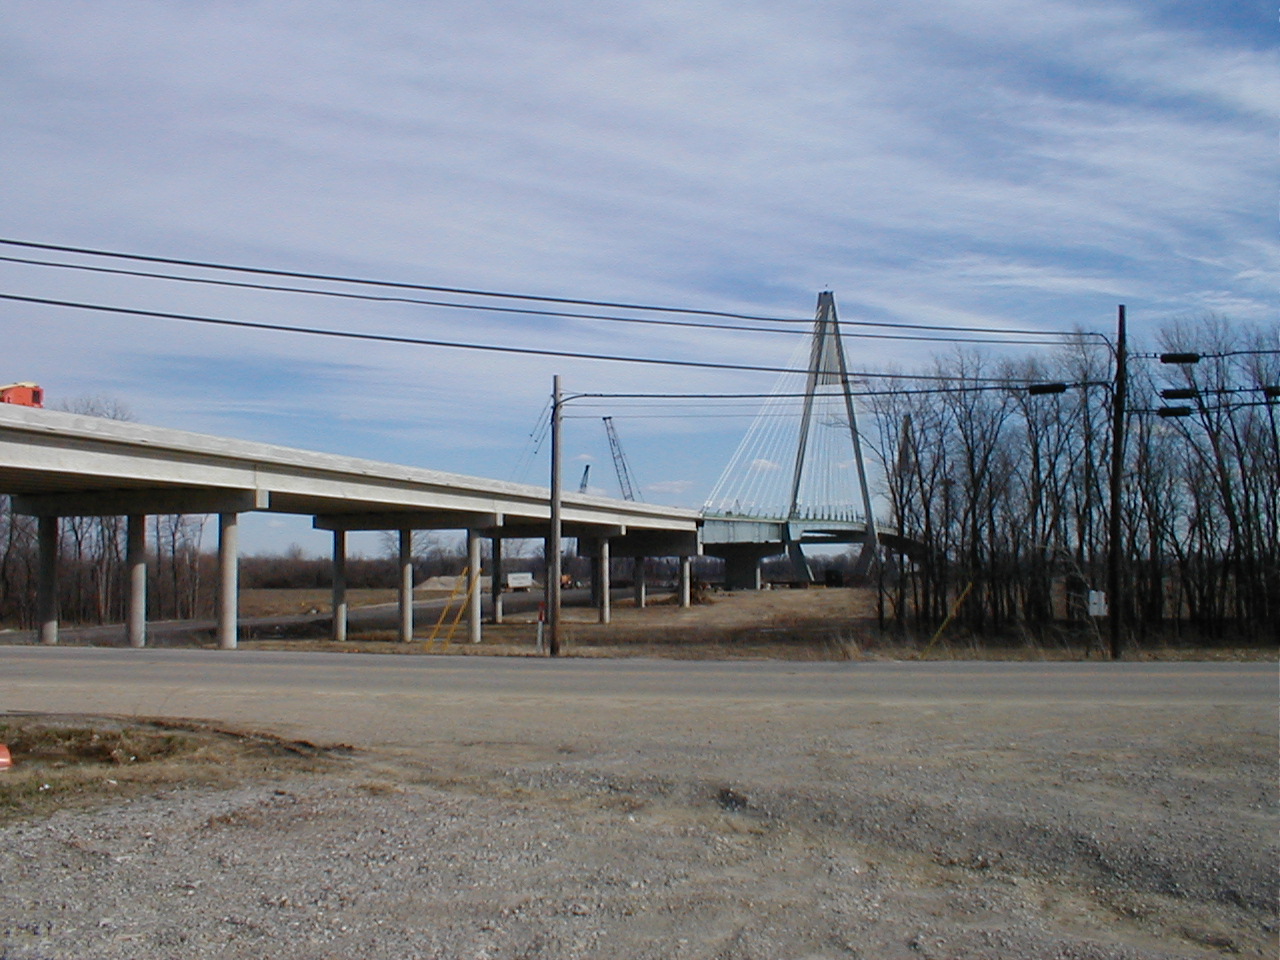 The bridge viewed from Indiana Route 66.